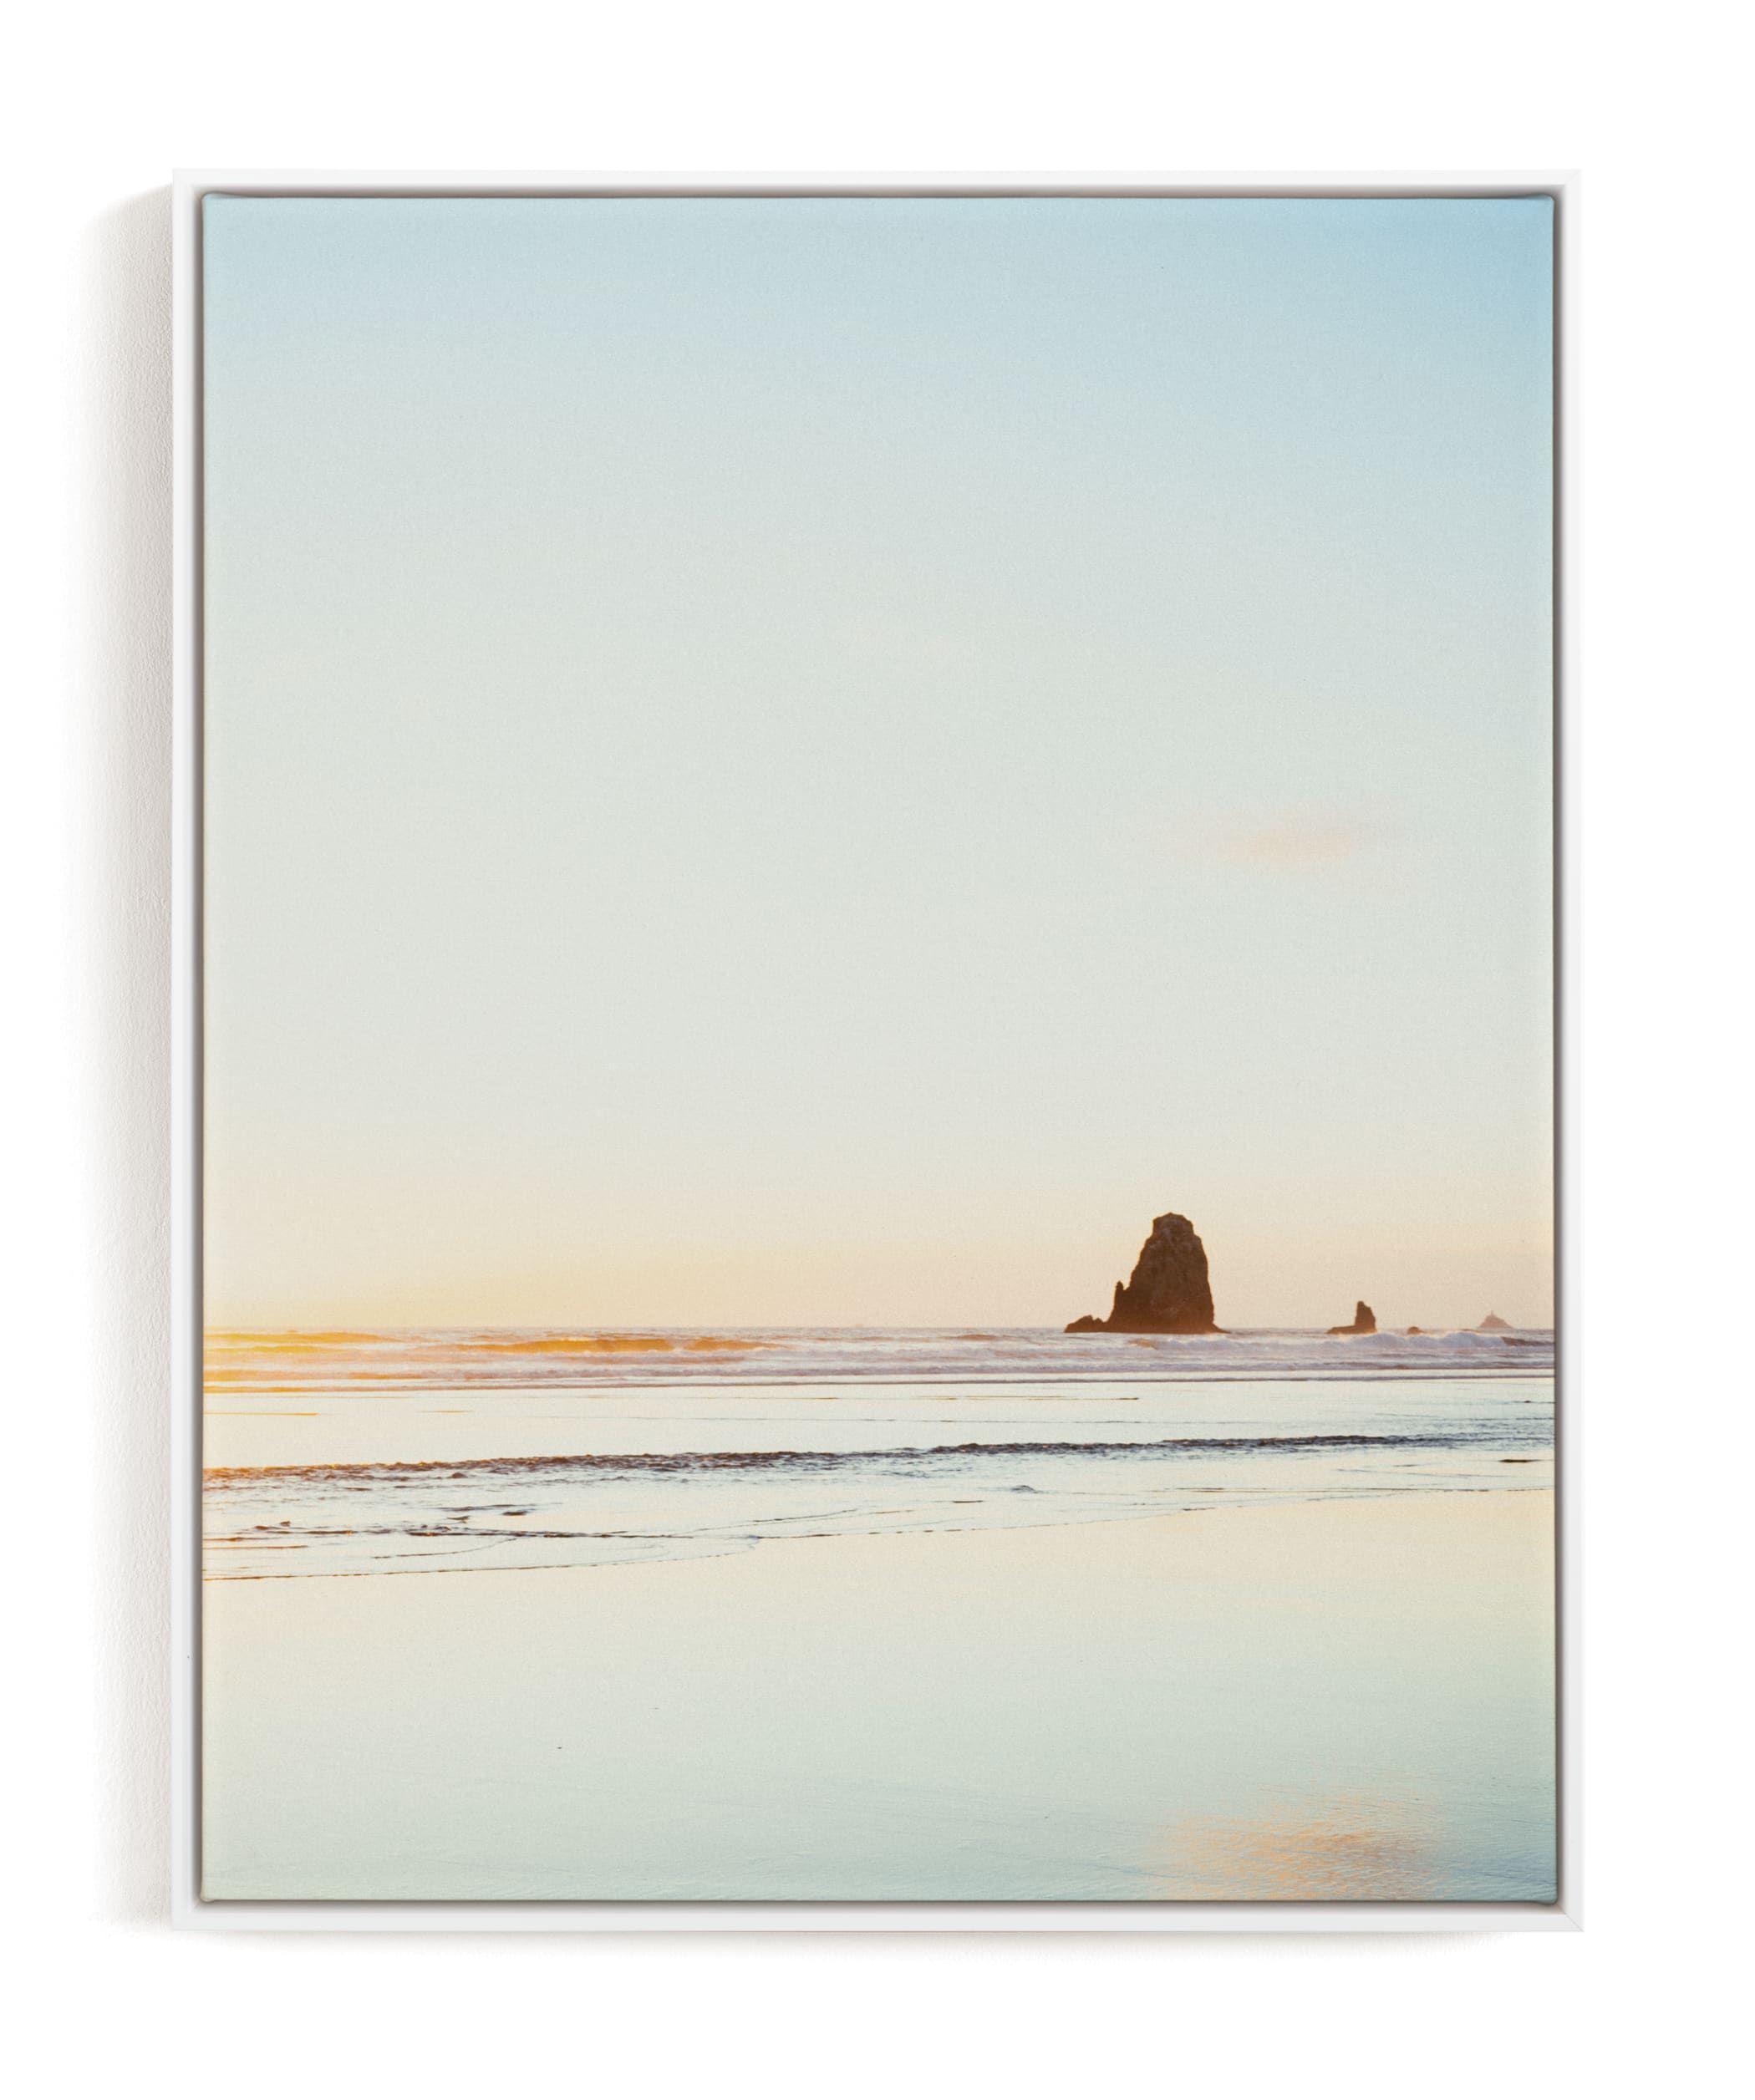 "Cannon Beach No. 2" - Photography Limited Edition Art Print by Kamala Nahas. | Minted